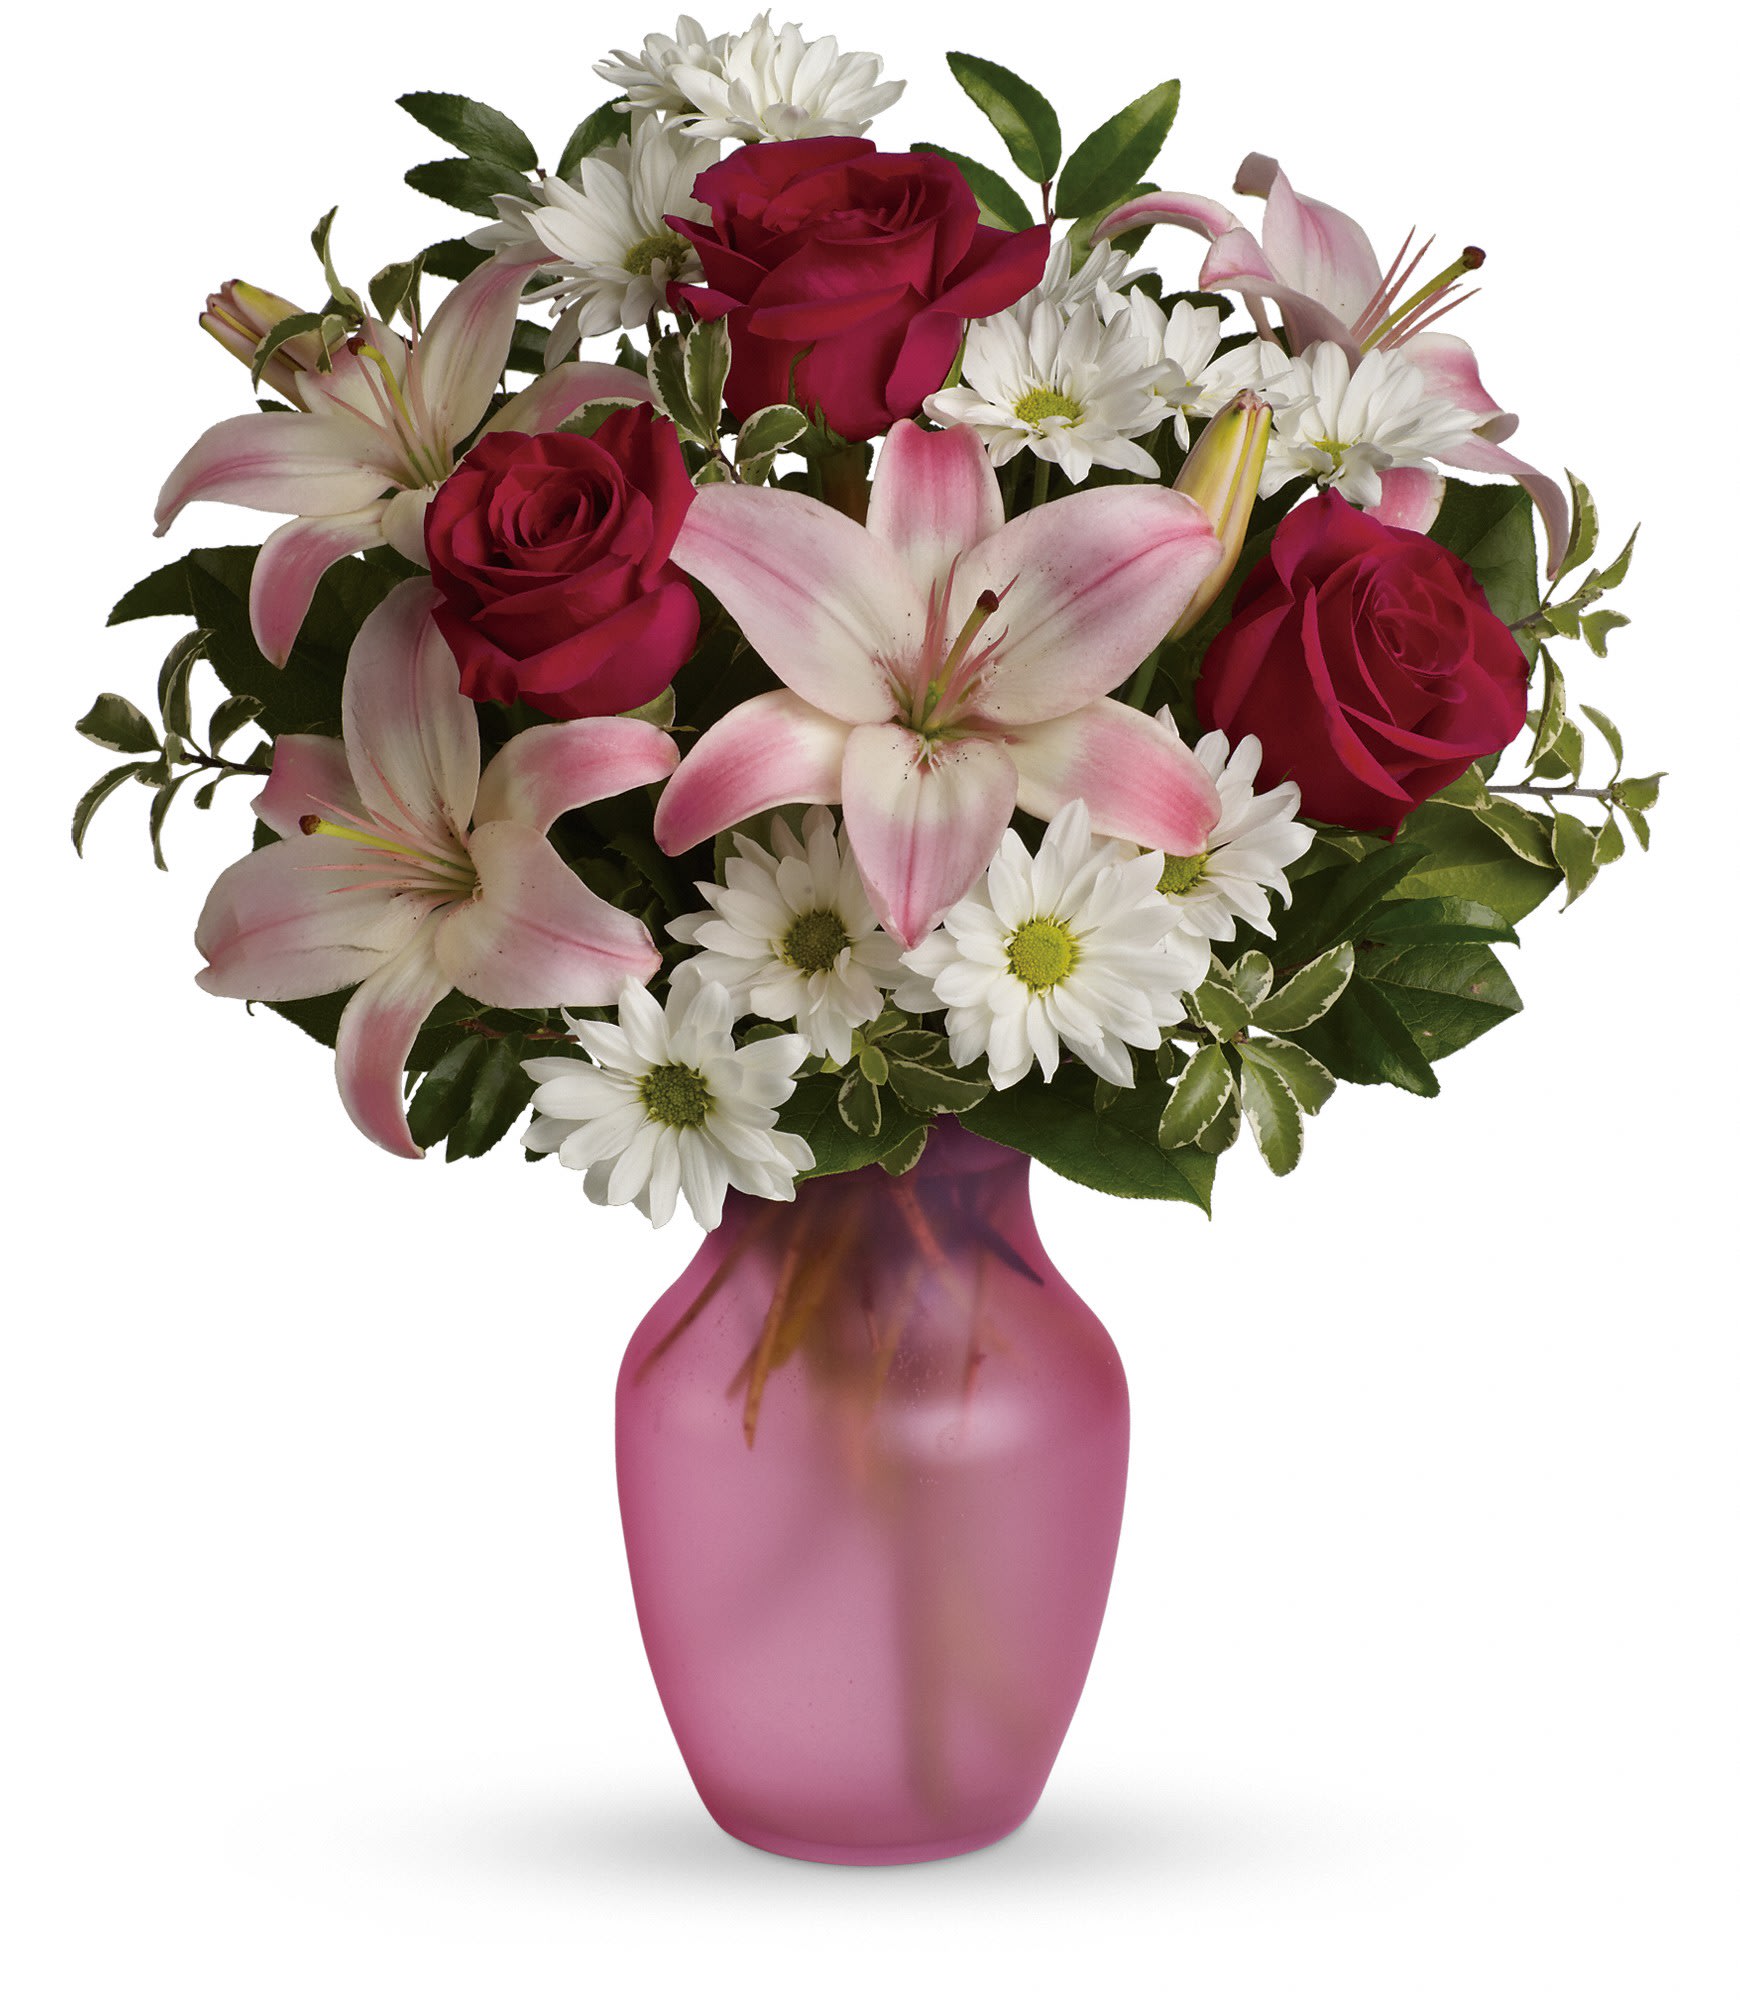 She's the One Bouquet - Your one and only love deserves an equally singular bouquet. Pamper her with this romantic mix of blooms presented in a beautiful matte rose colored glass vase. 